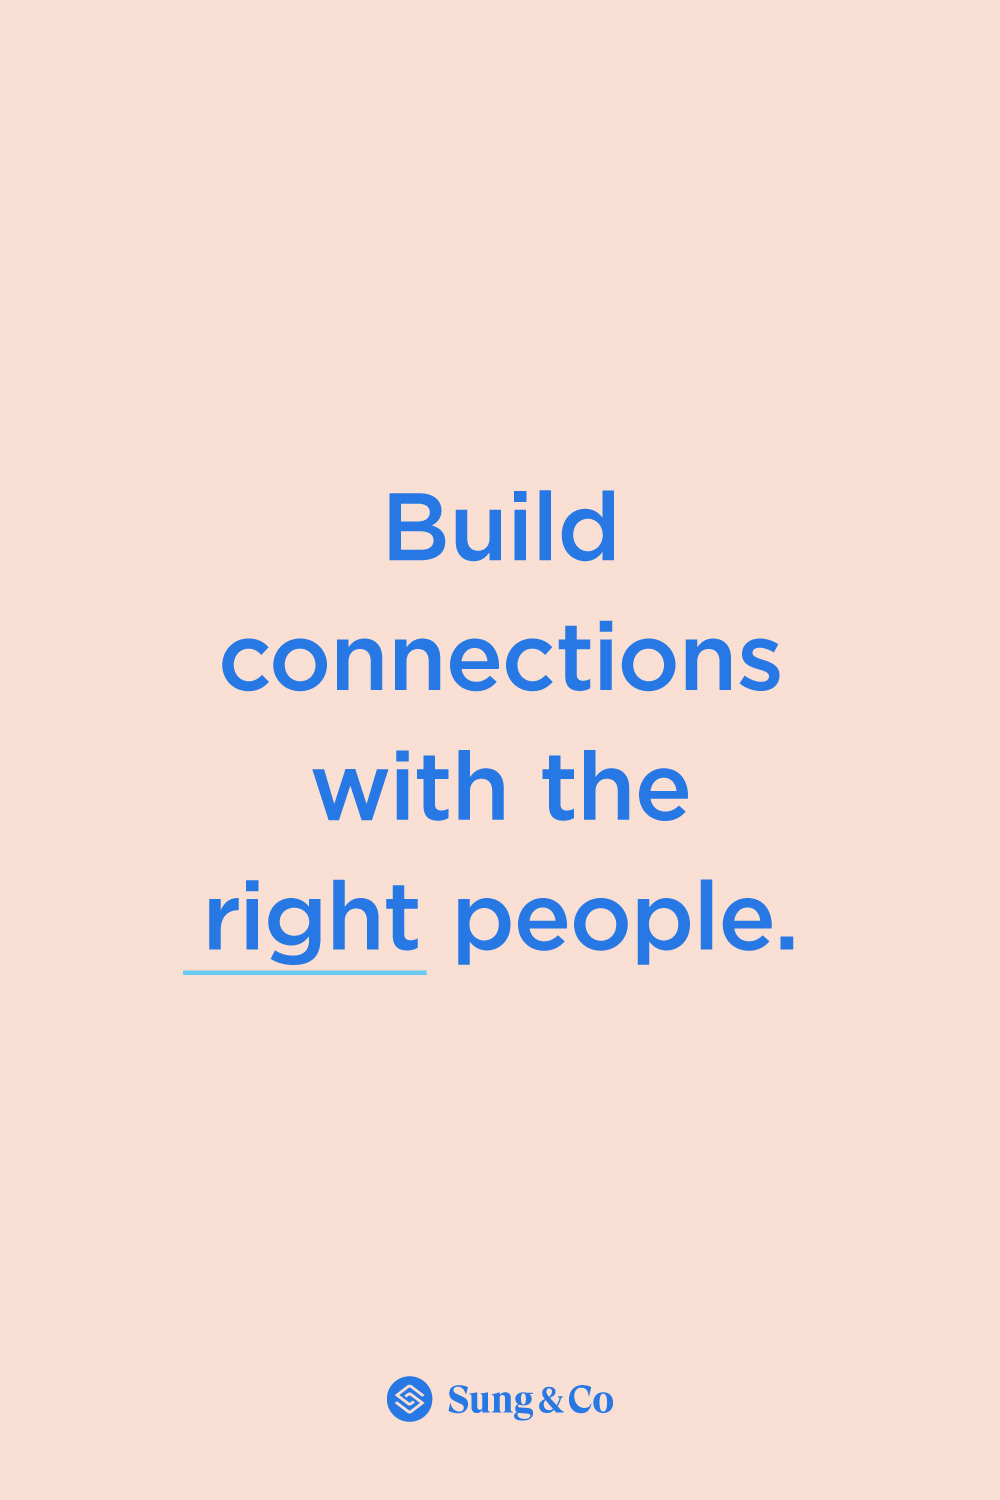 "Build connections with the right people." - Sung + Co